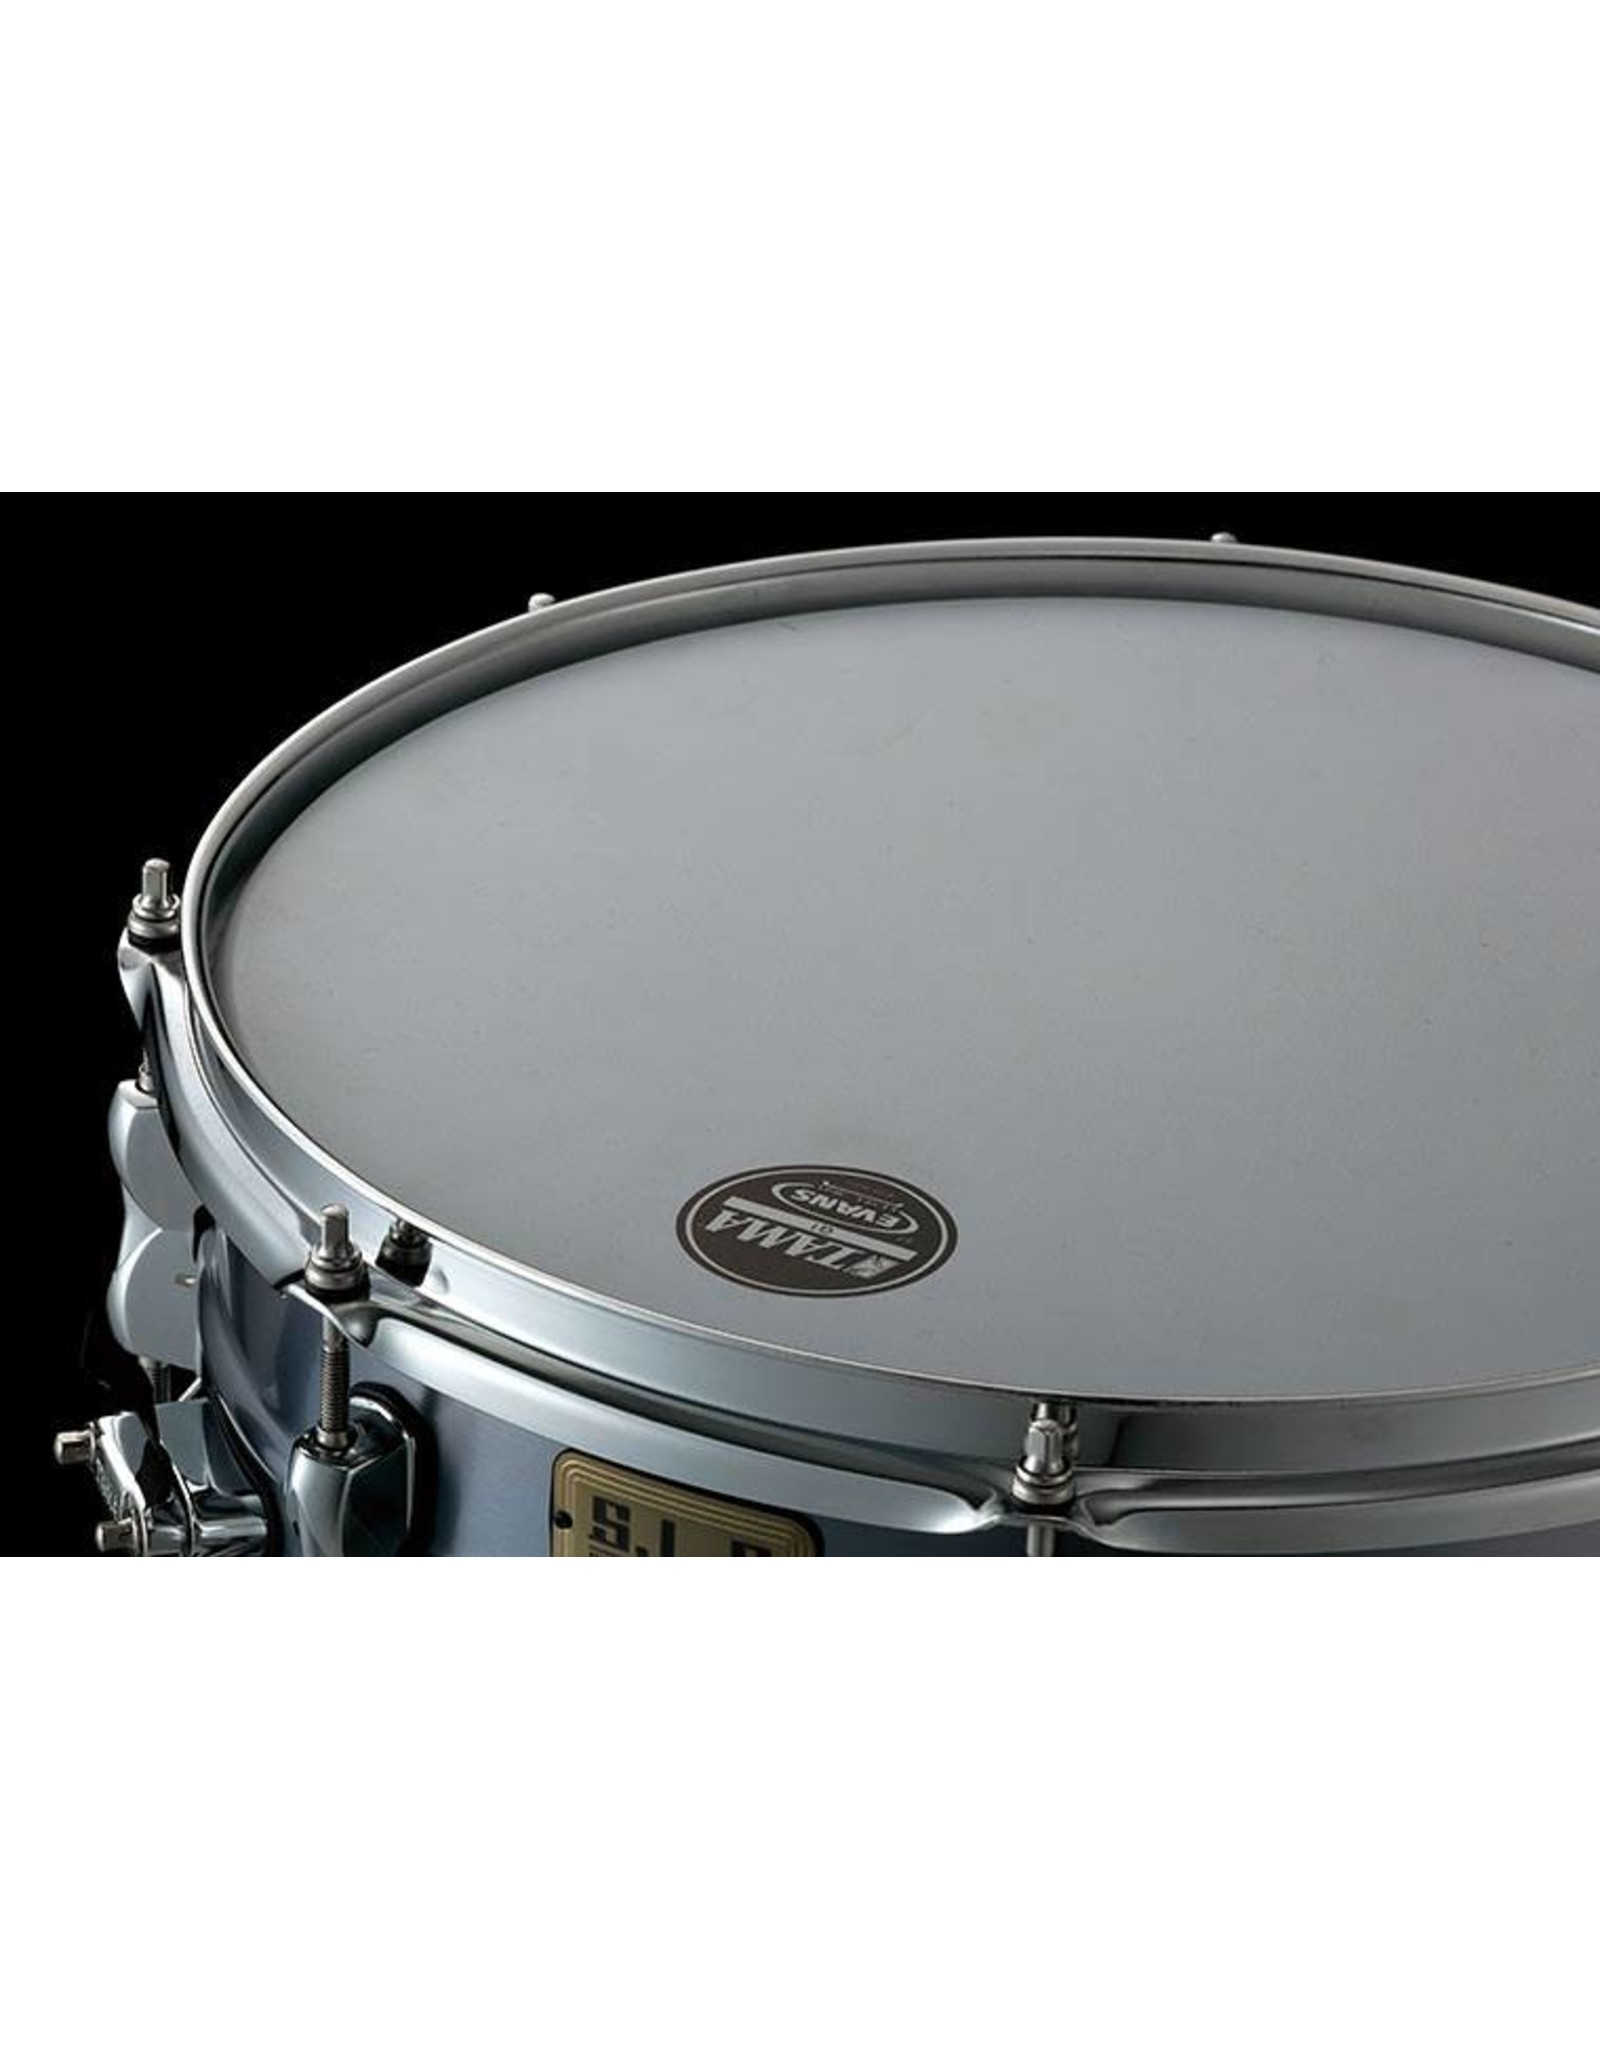 Tama S LAL1455 DRY ALMINUM 5.5X14 SD snare drum LAL1455